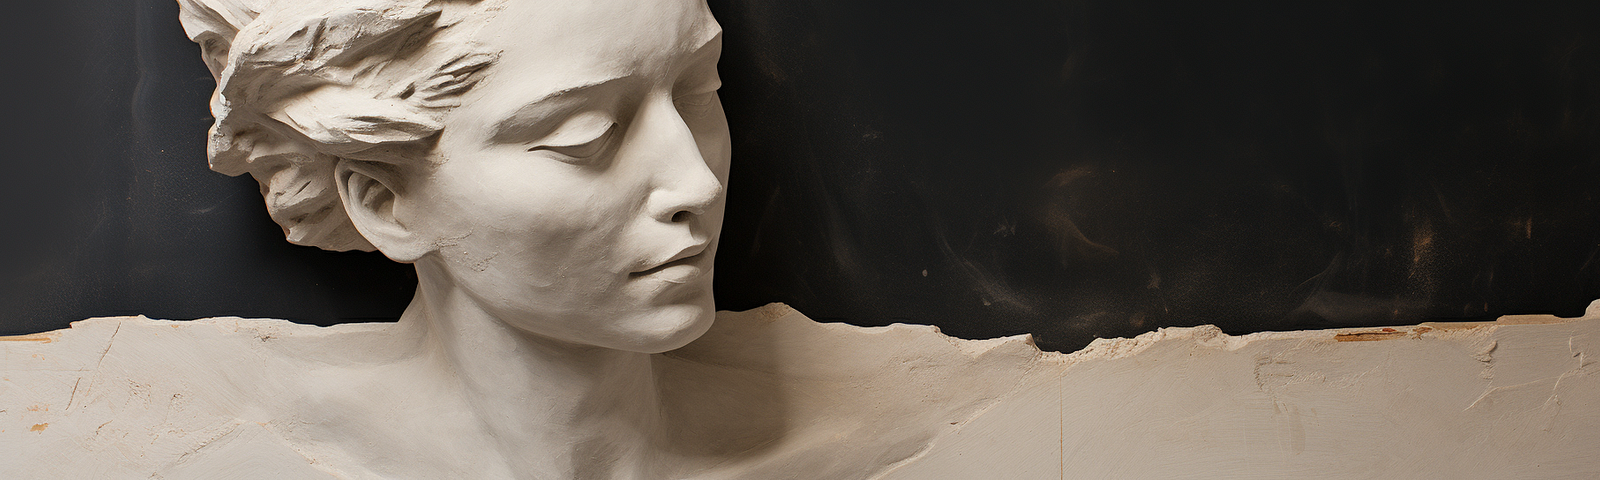 A partially finished sculpture of a womans head in an otherwise unfinished block of marble.